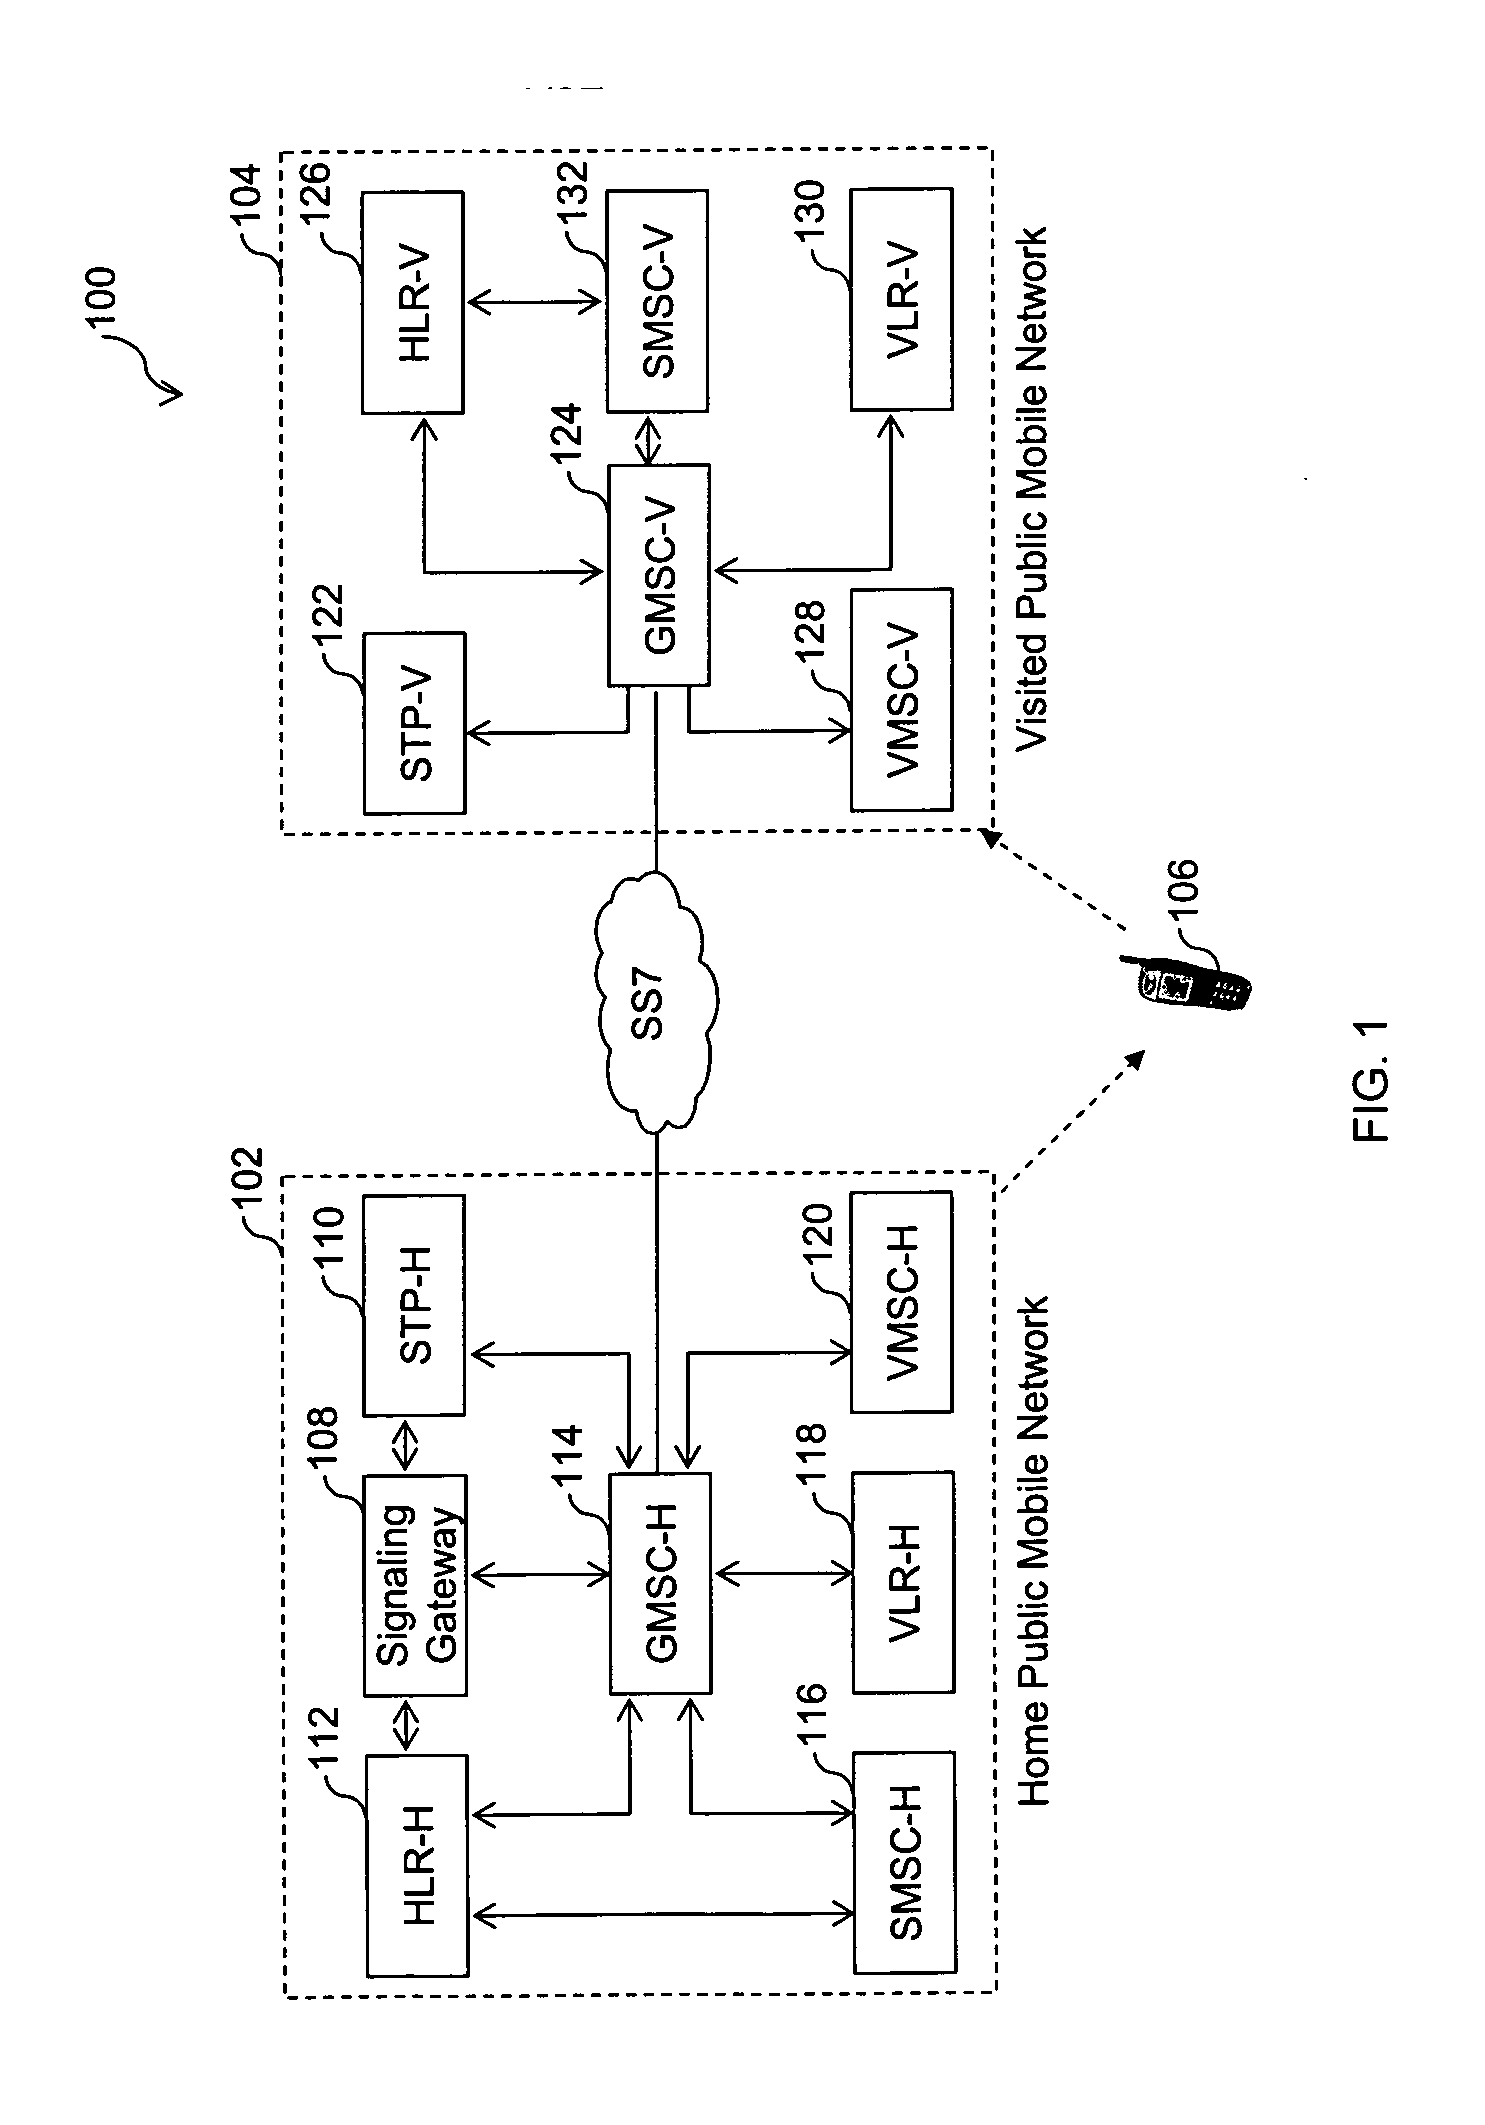 Method and system for keeping all phone numbers active while roaming with diverse operator subscriber identity modules